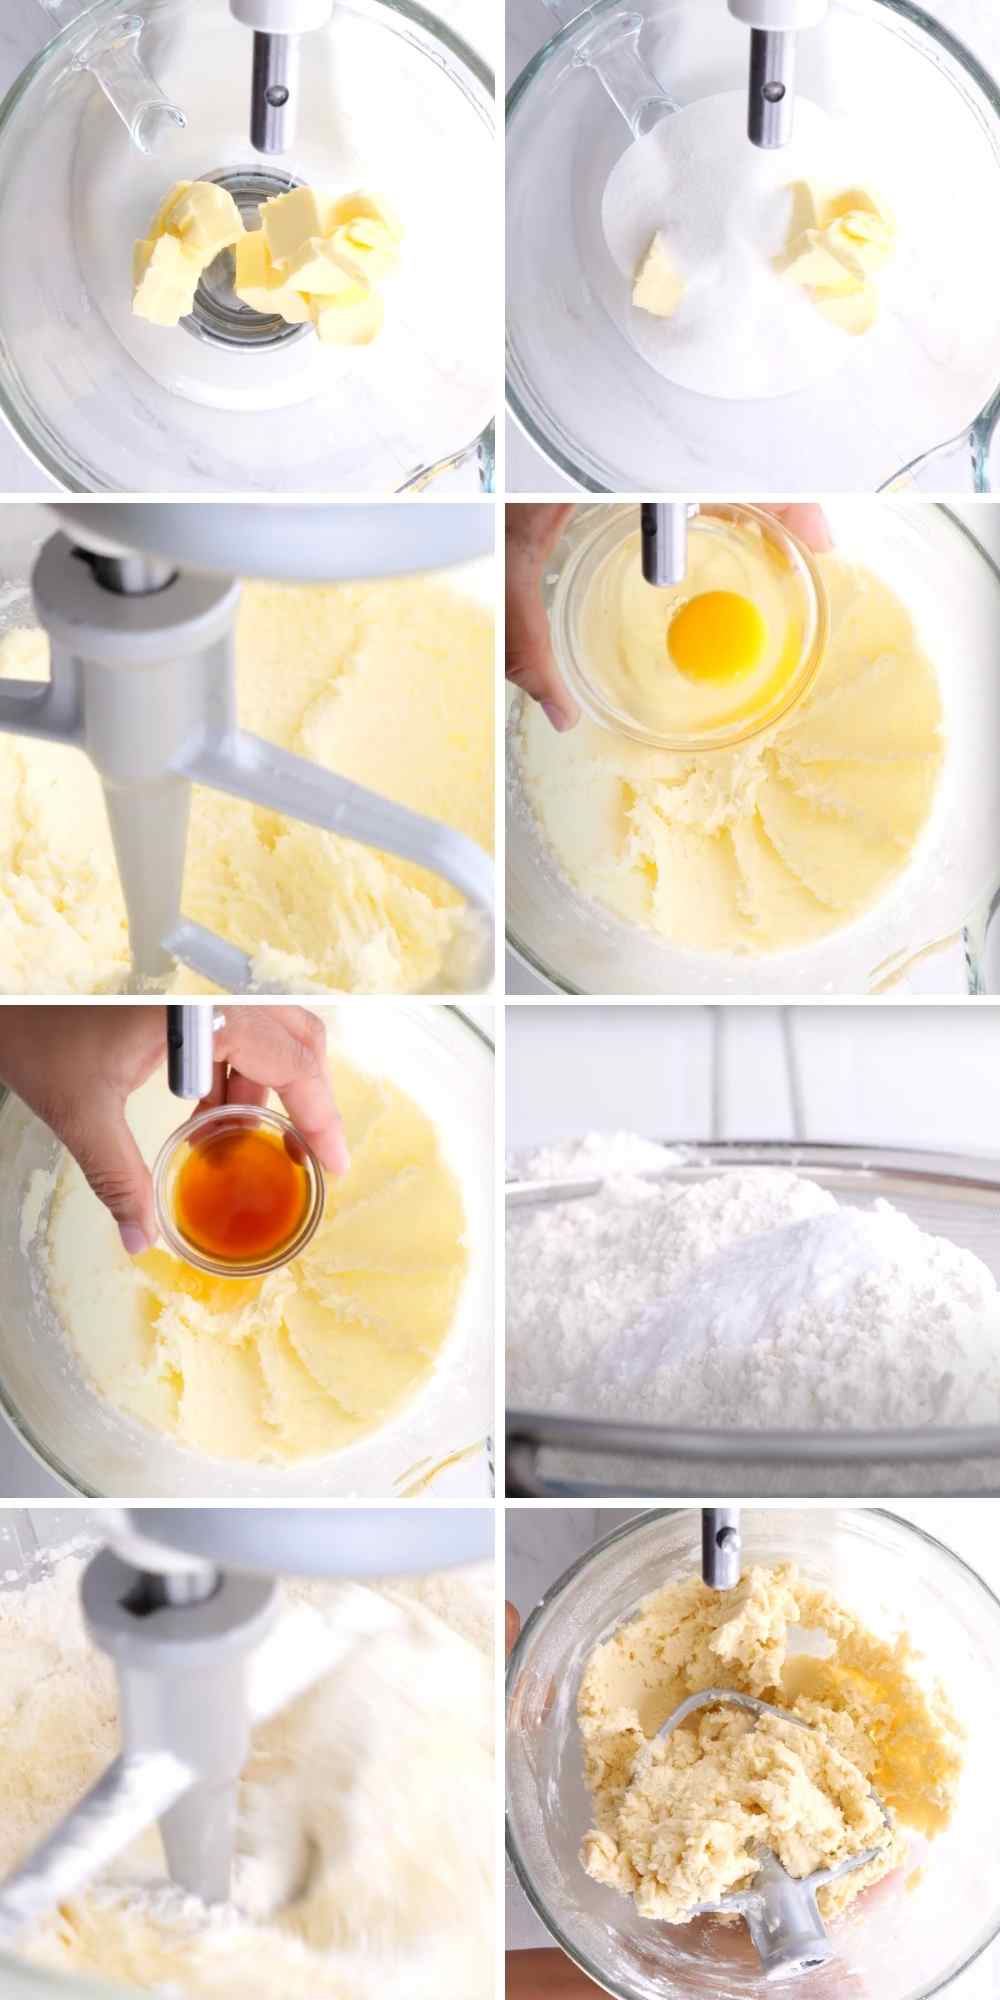 Sugar Cookie steps for making dough